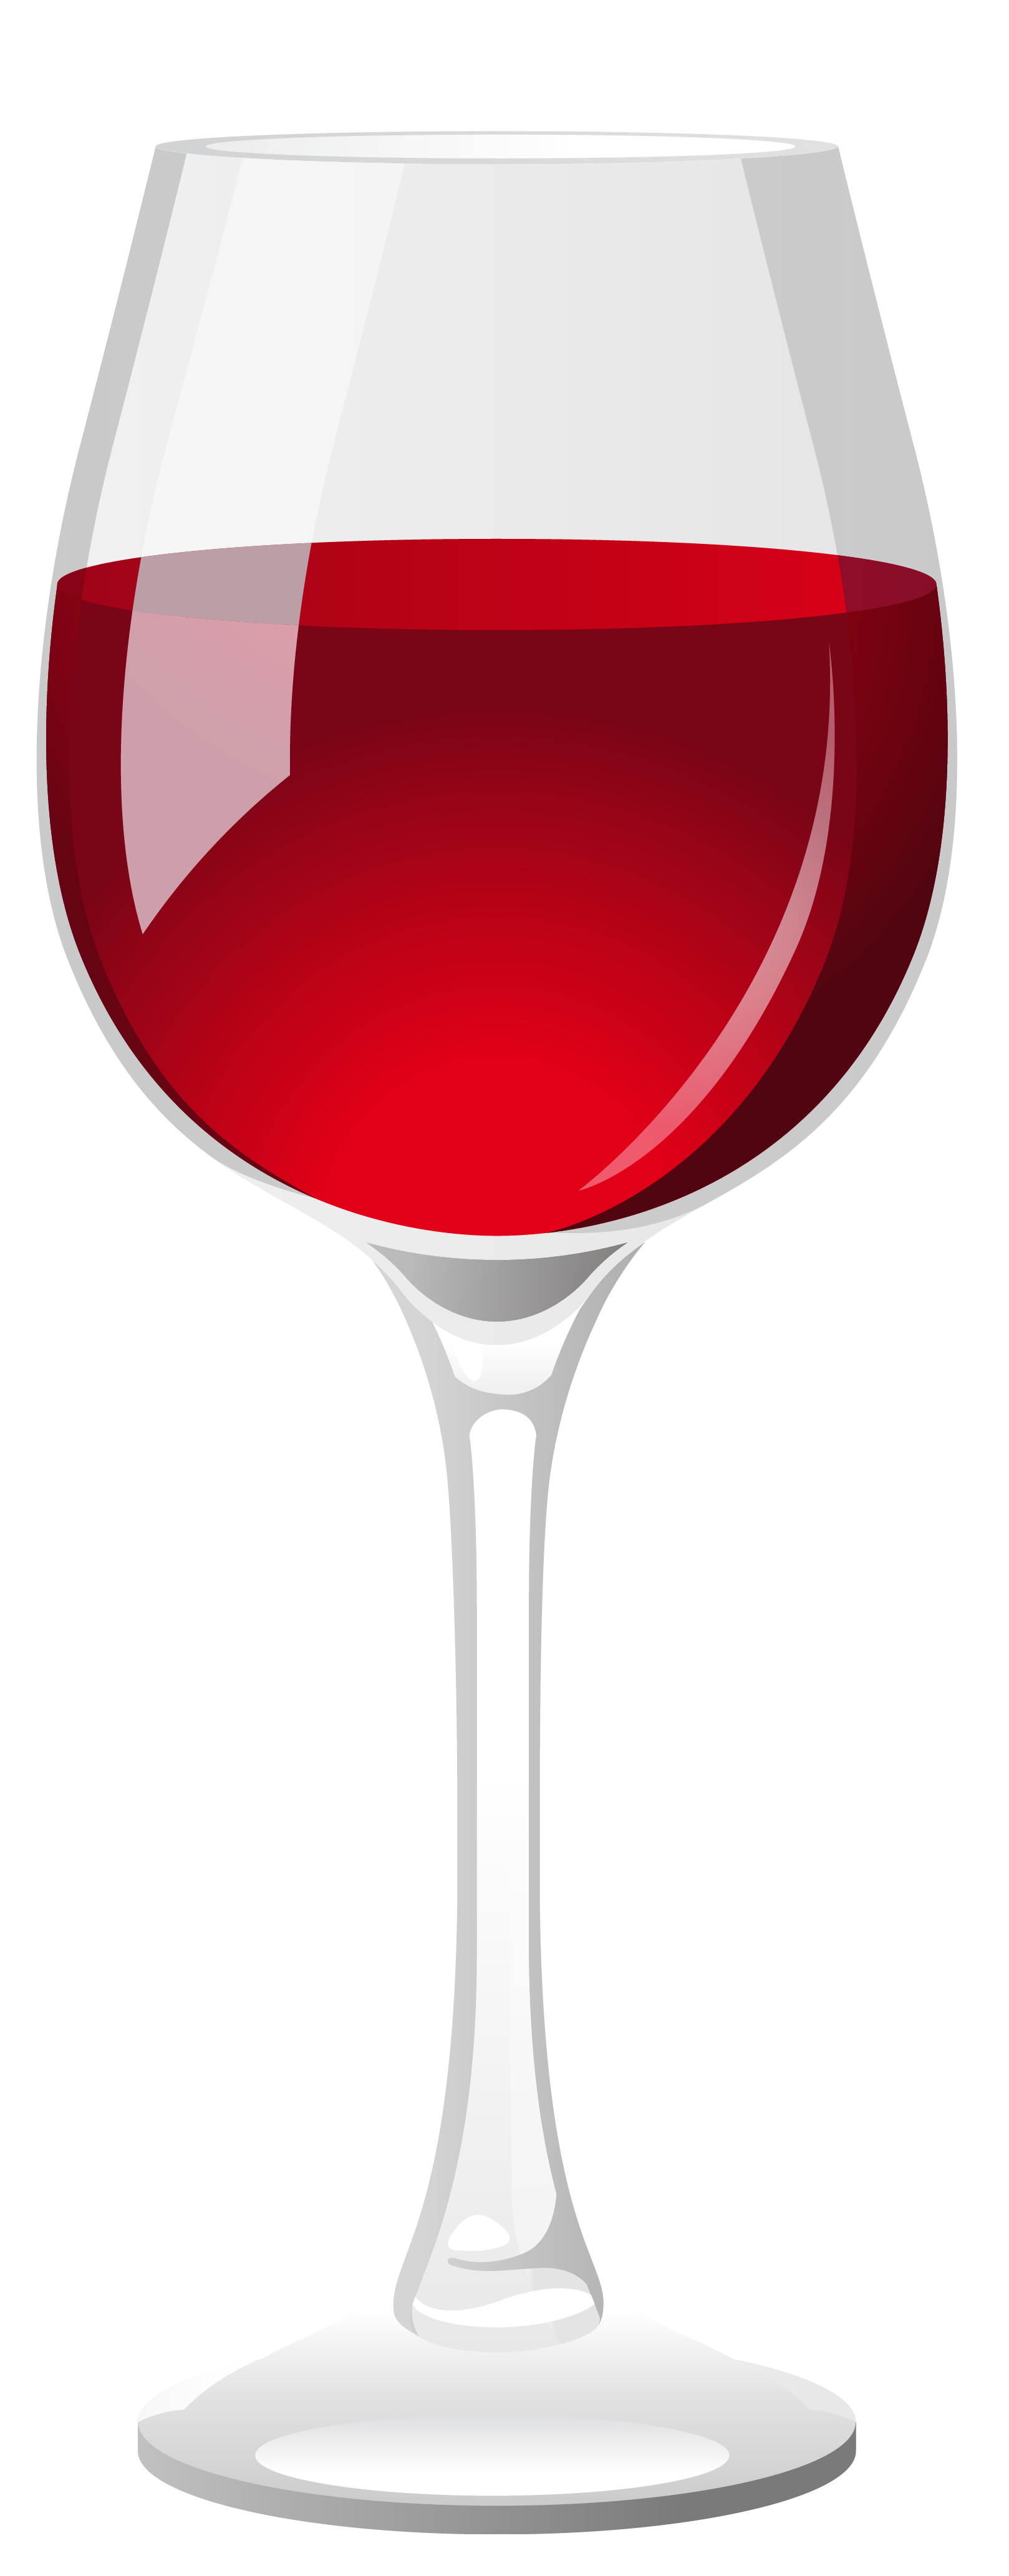 Red Wine Glass PNG Clipart.